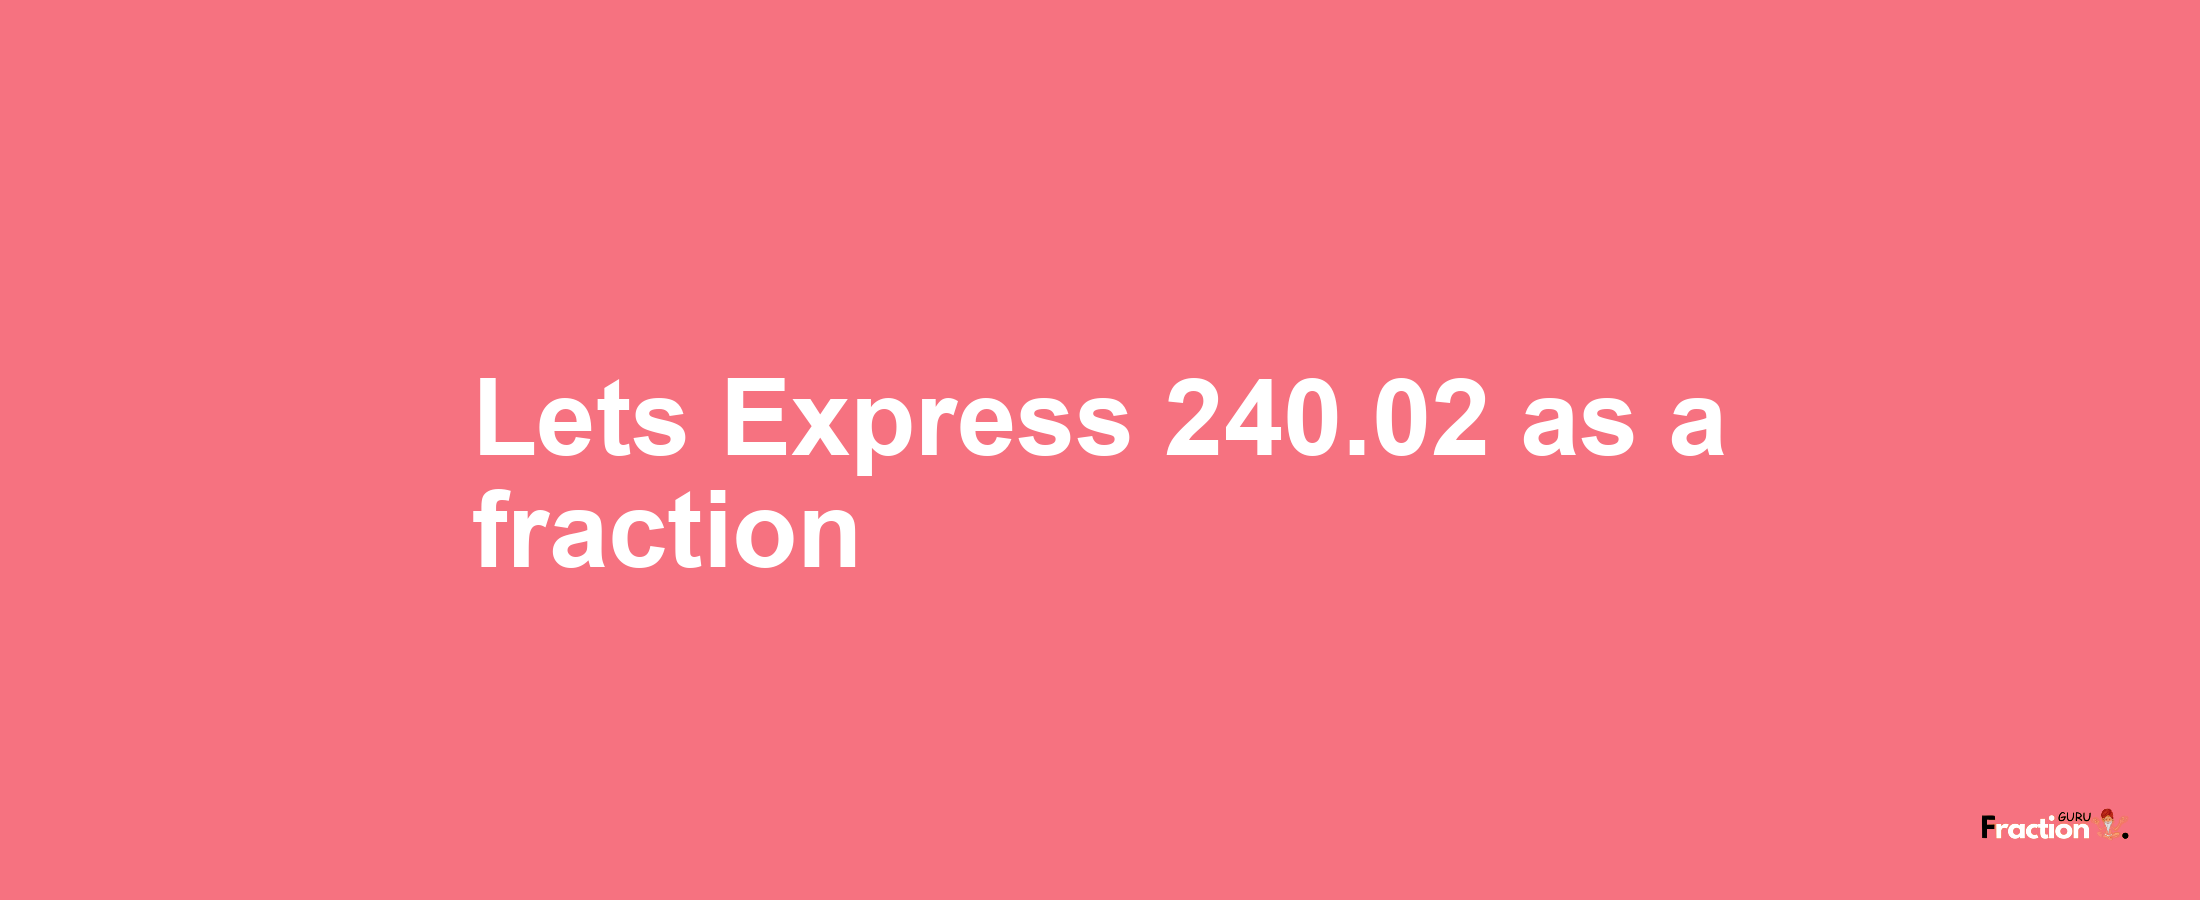 Lets Express 240.02 as afraction